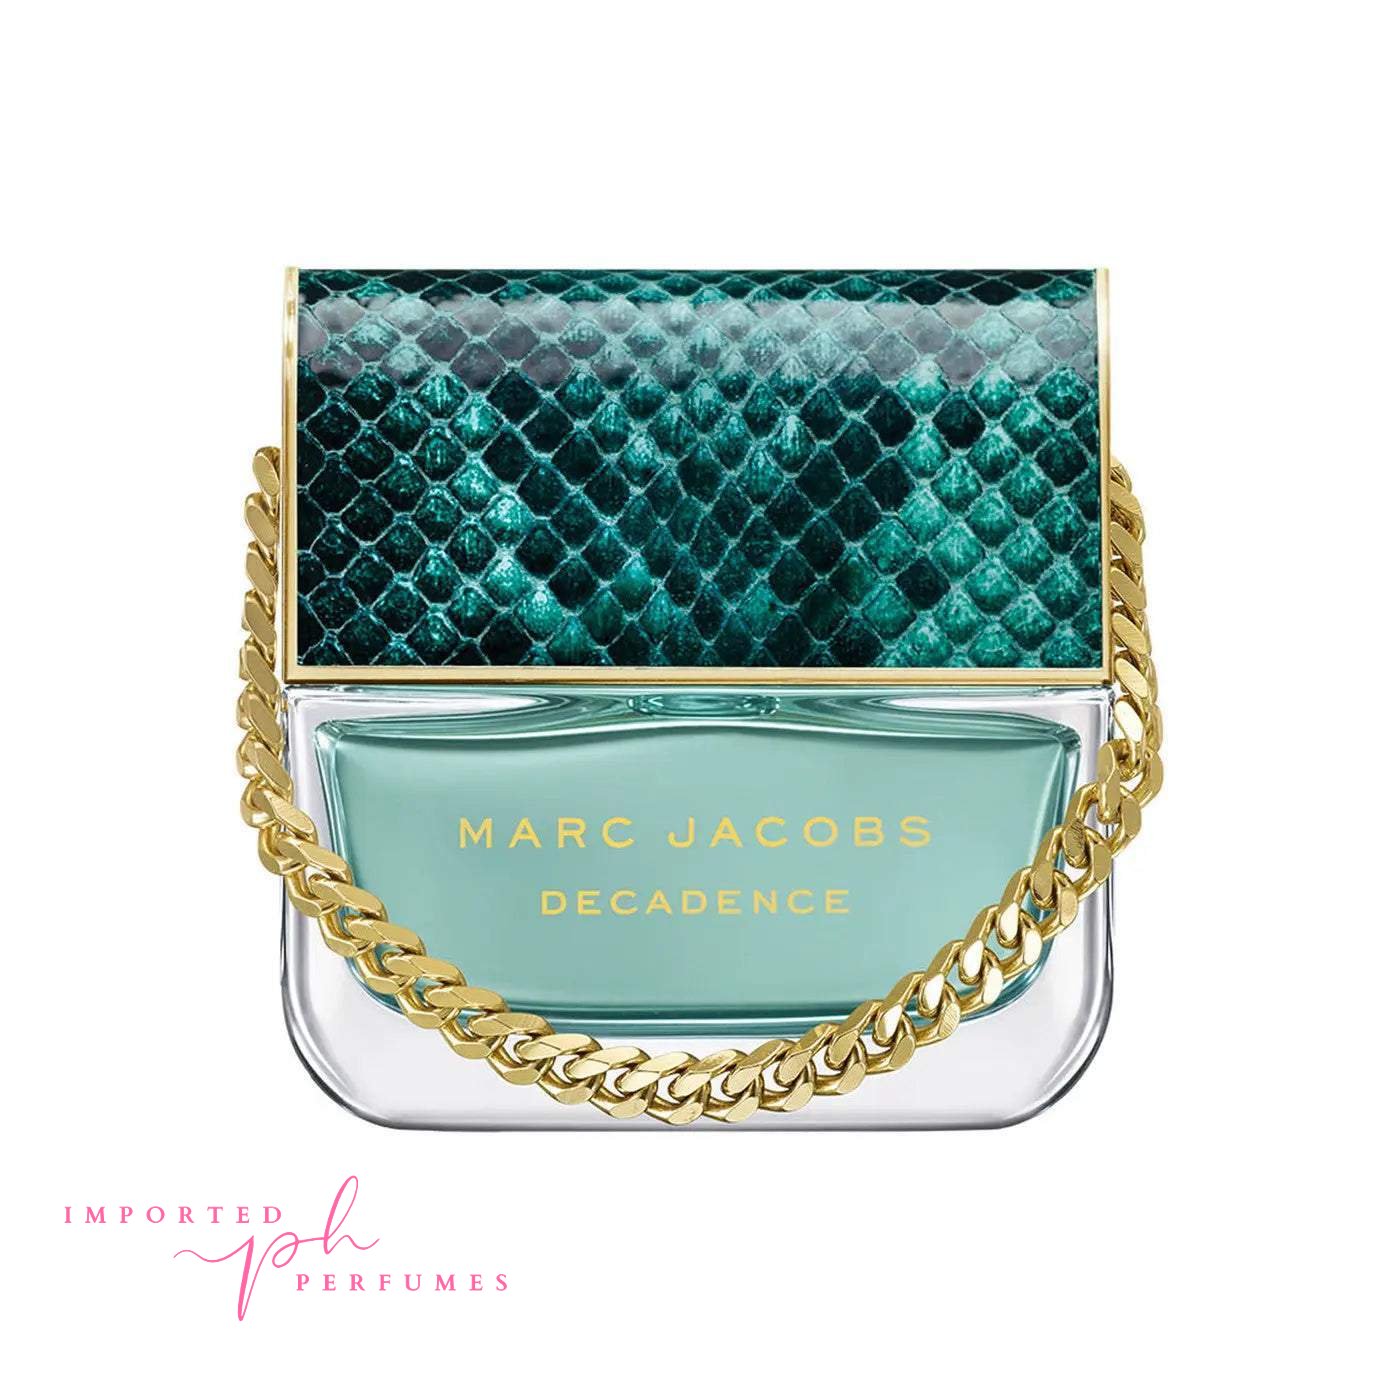 Marc Jacobs Decadence Eau So Decadent For Women100ml-Imported Perfumes Co-Decadence,for women,for wone,for woone,Marc Jacobs,women